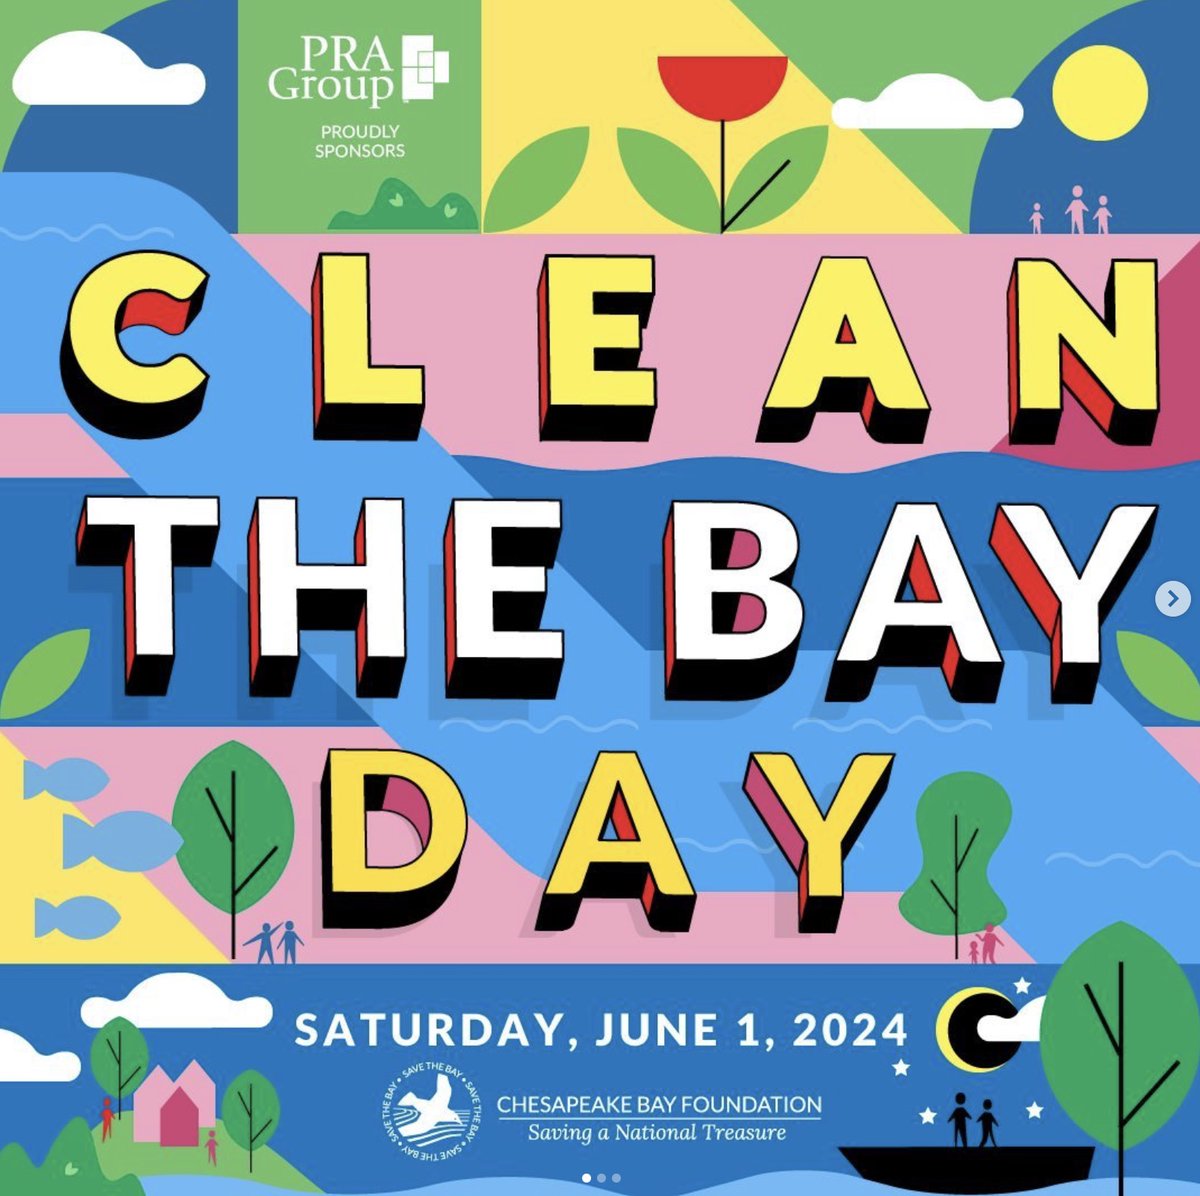 June is right around the corner, which means it's almost time for @chesapeakebay's annual Clean the Bay Day! PRA Group is proud to serve as the presenting sponsor of the event. Register now to help keep the Bay beautiful: cbf.org/events/clean-t…